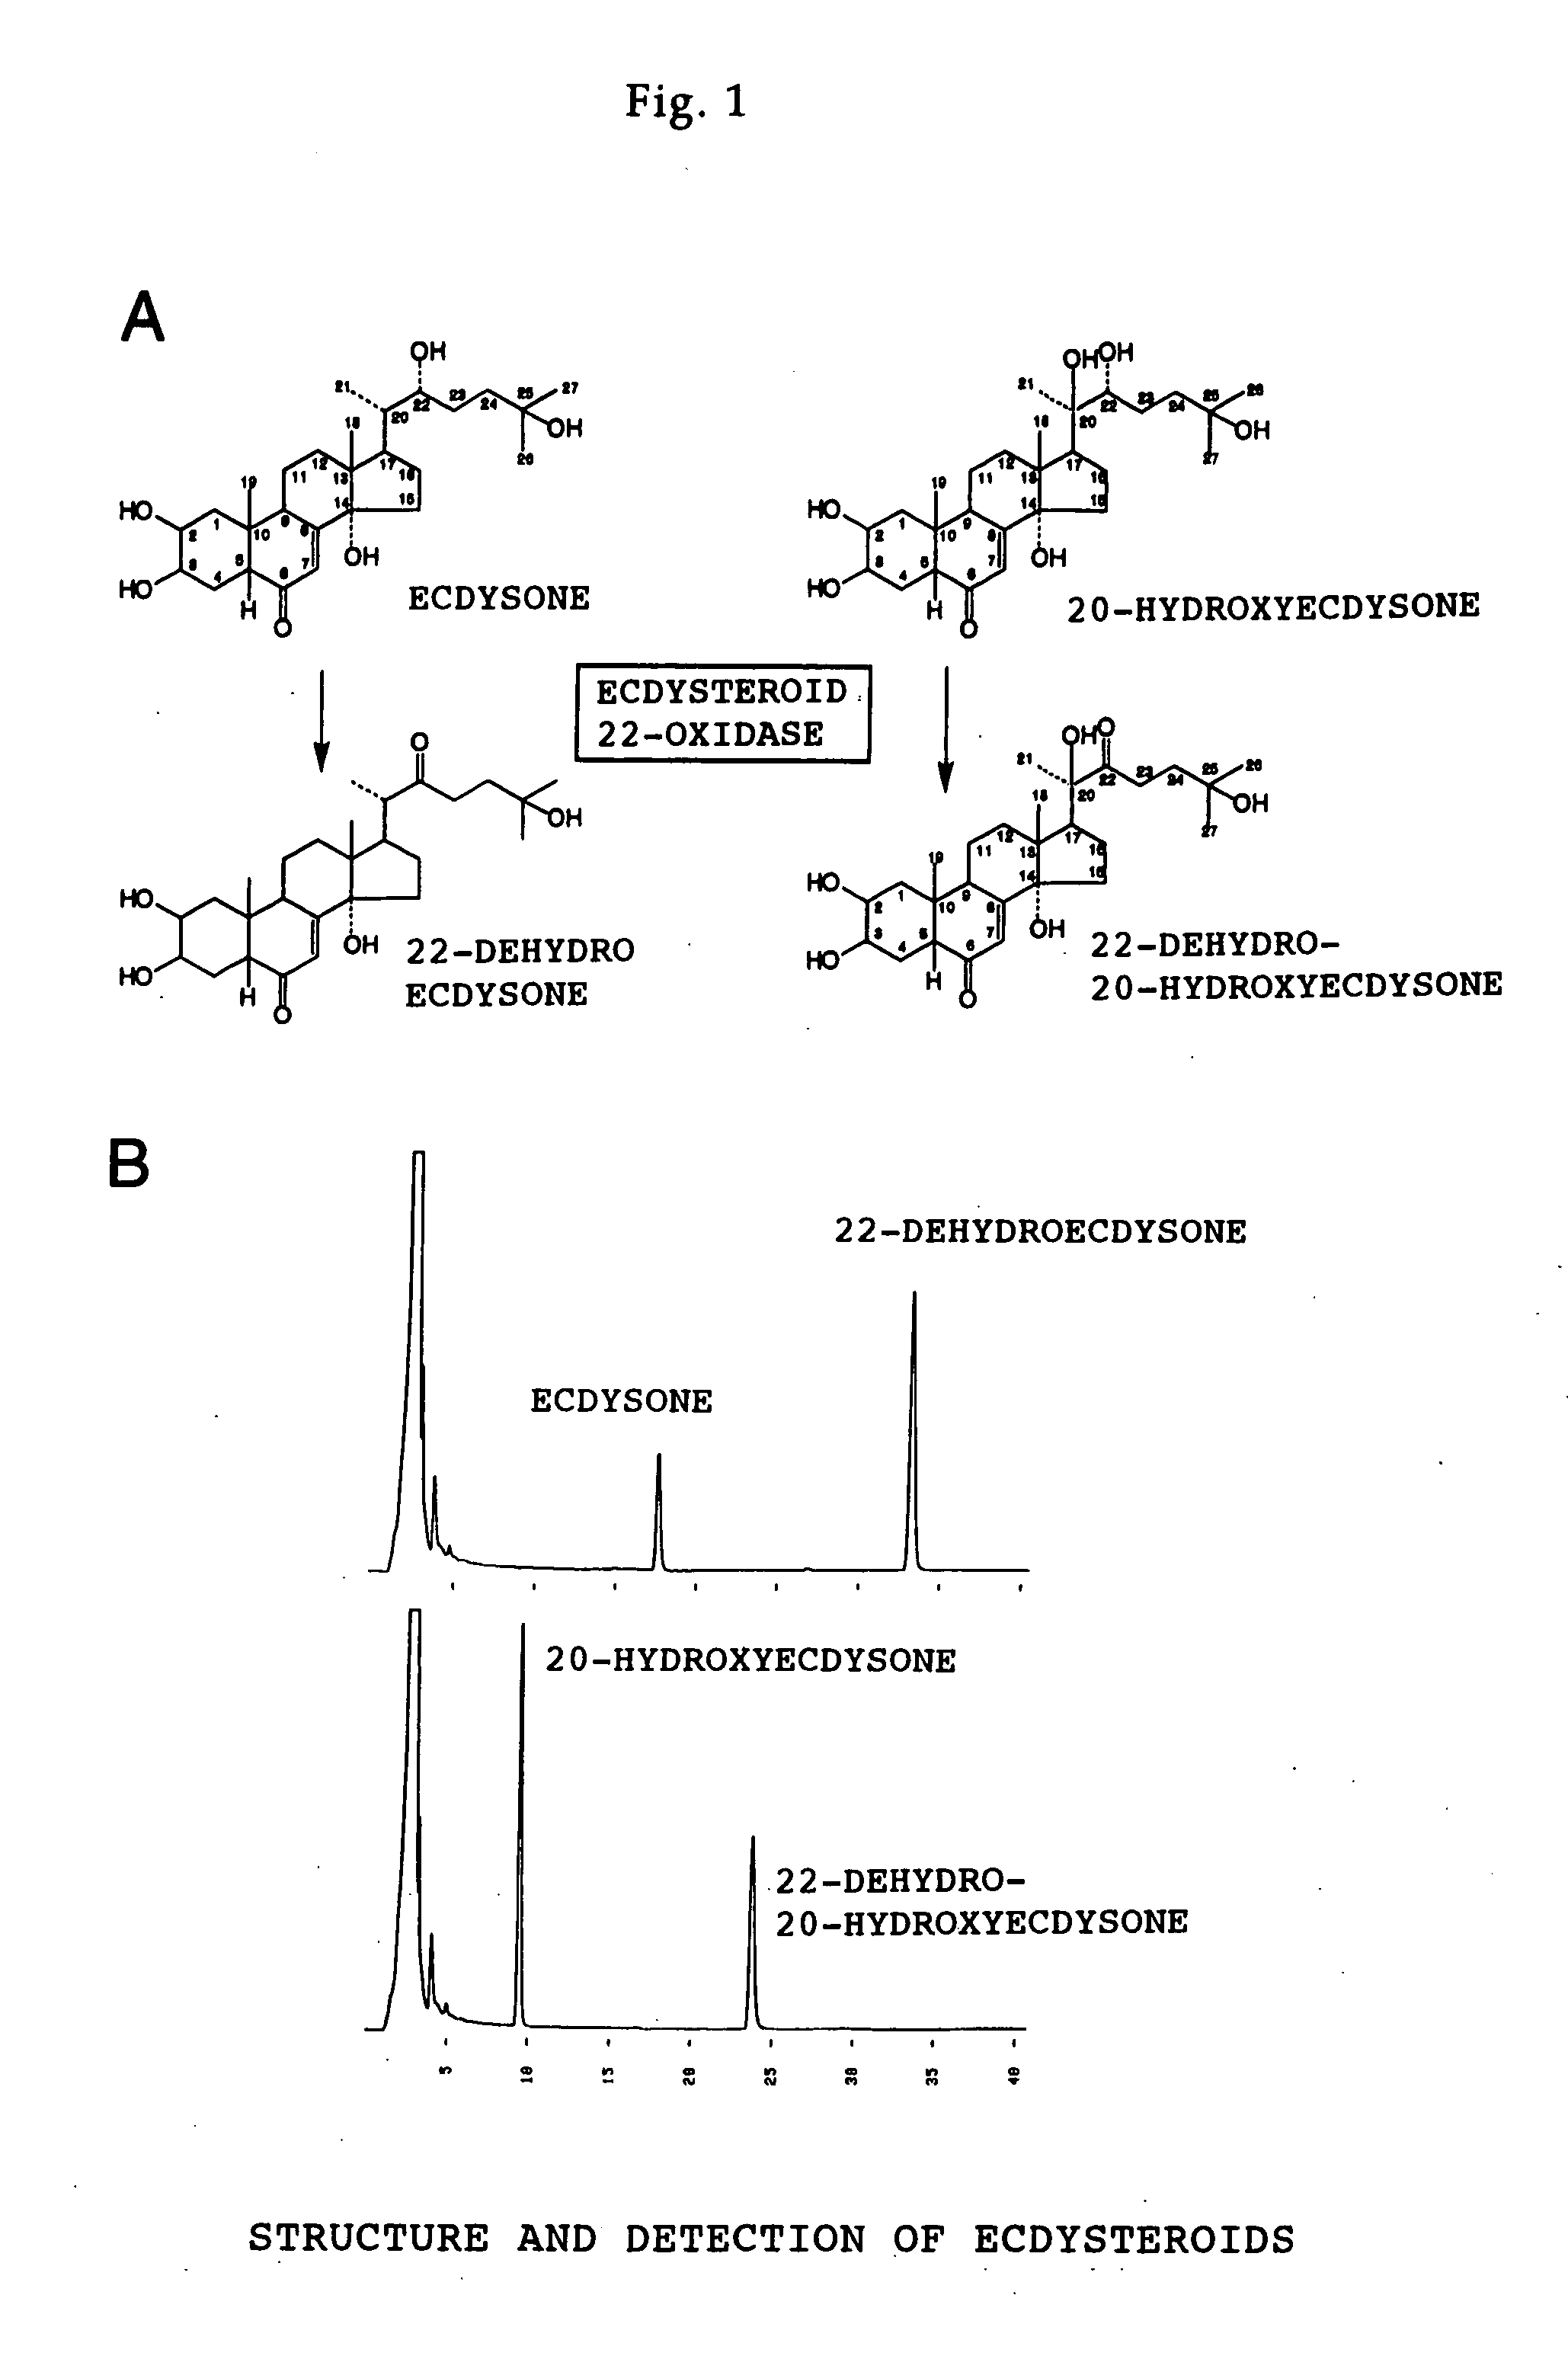 &#x3c;I&gt;Nomuraeae rileyi&#x3c;/I&gt;-origin ecdysteroid 22-oxidase and molt hormone inactivation system with the use of the same